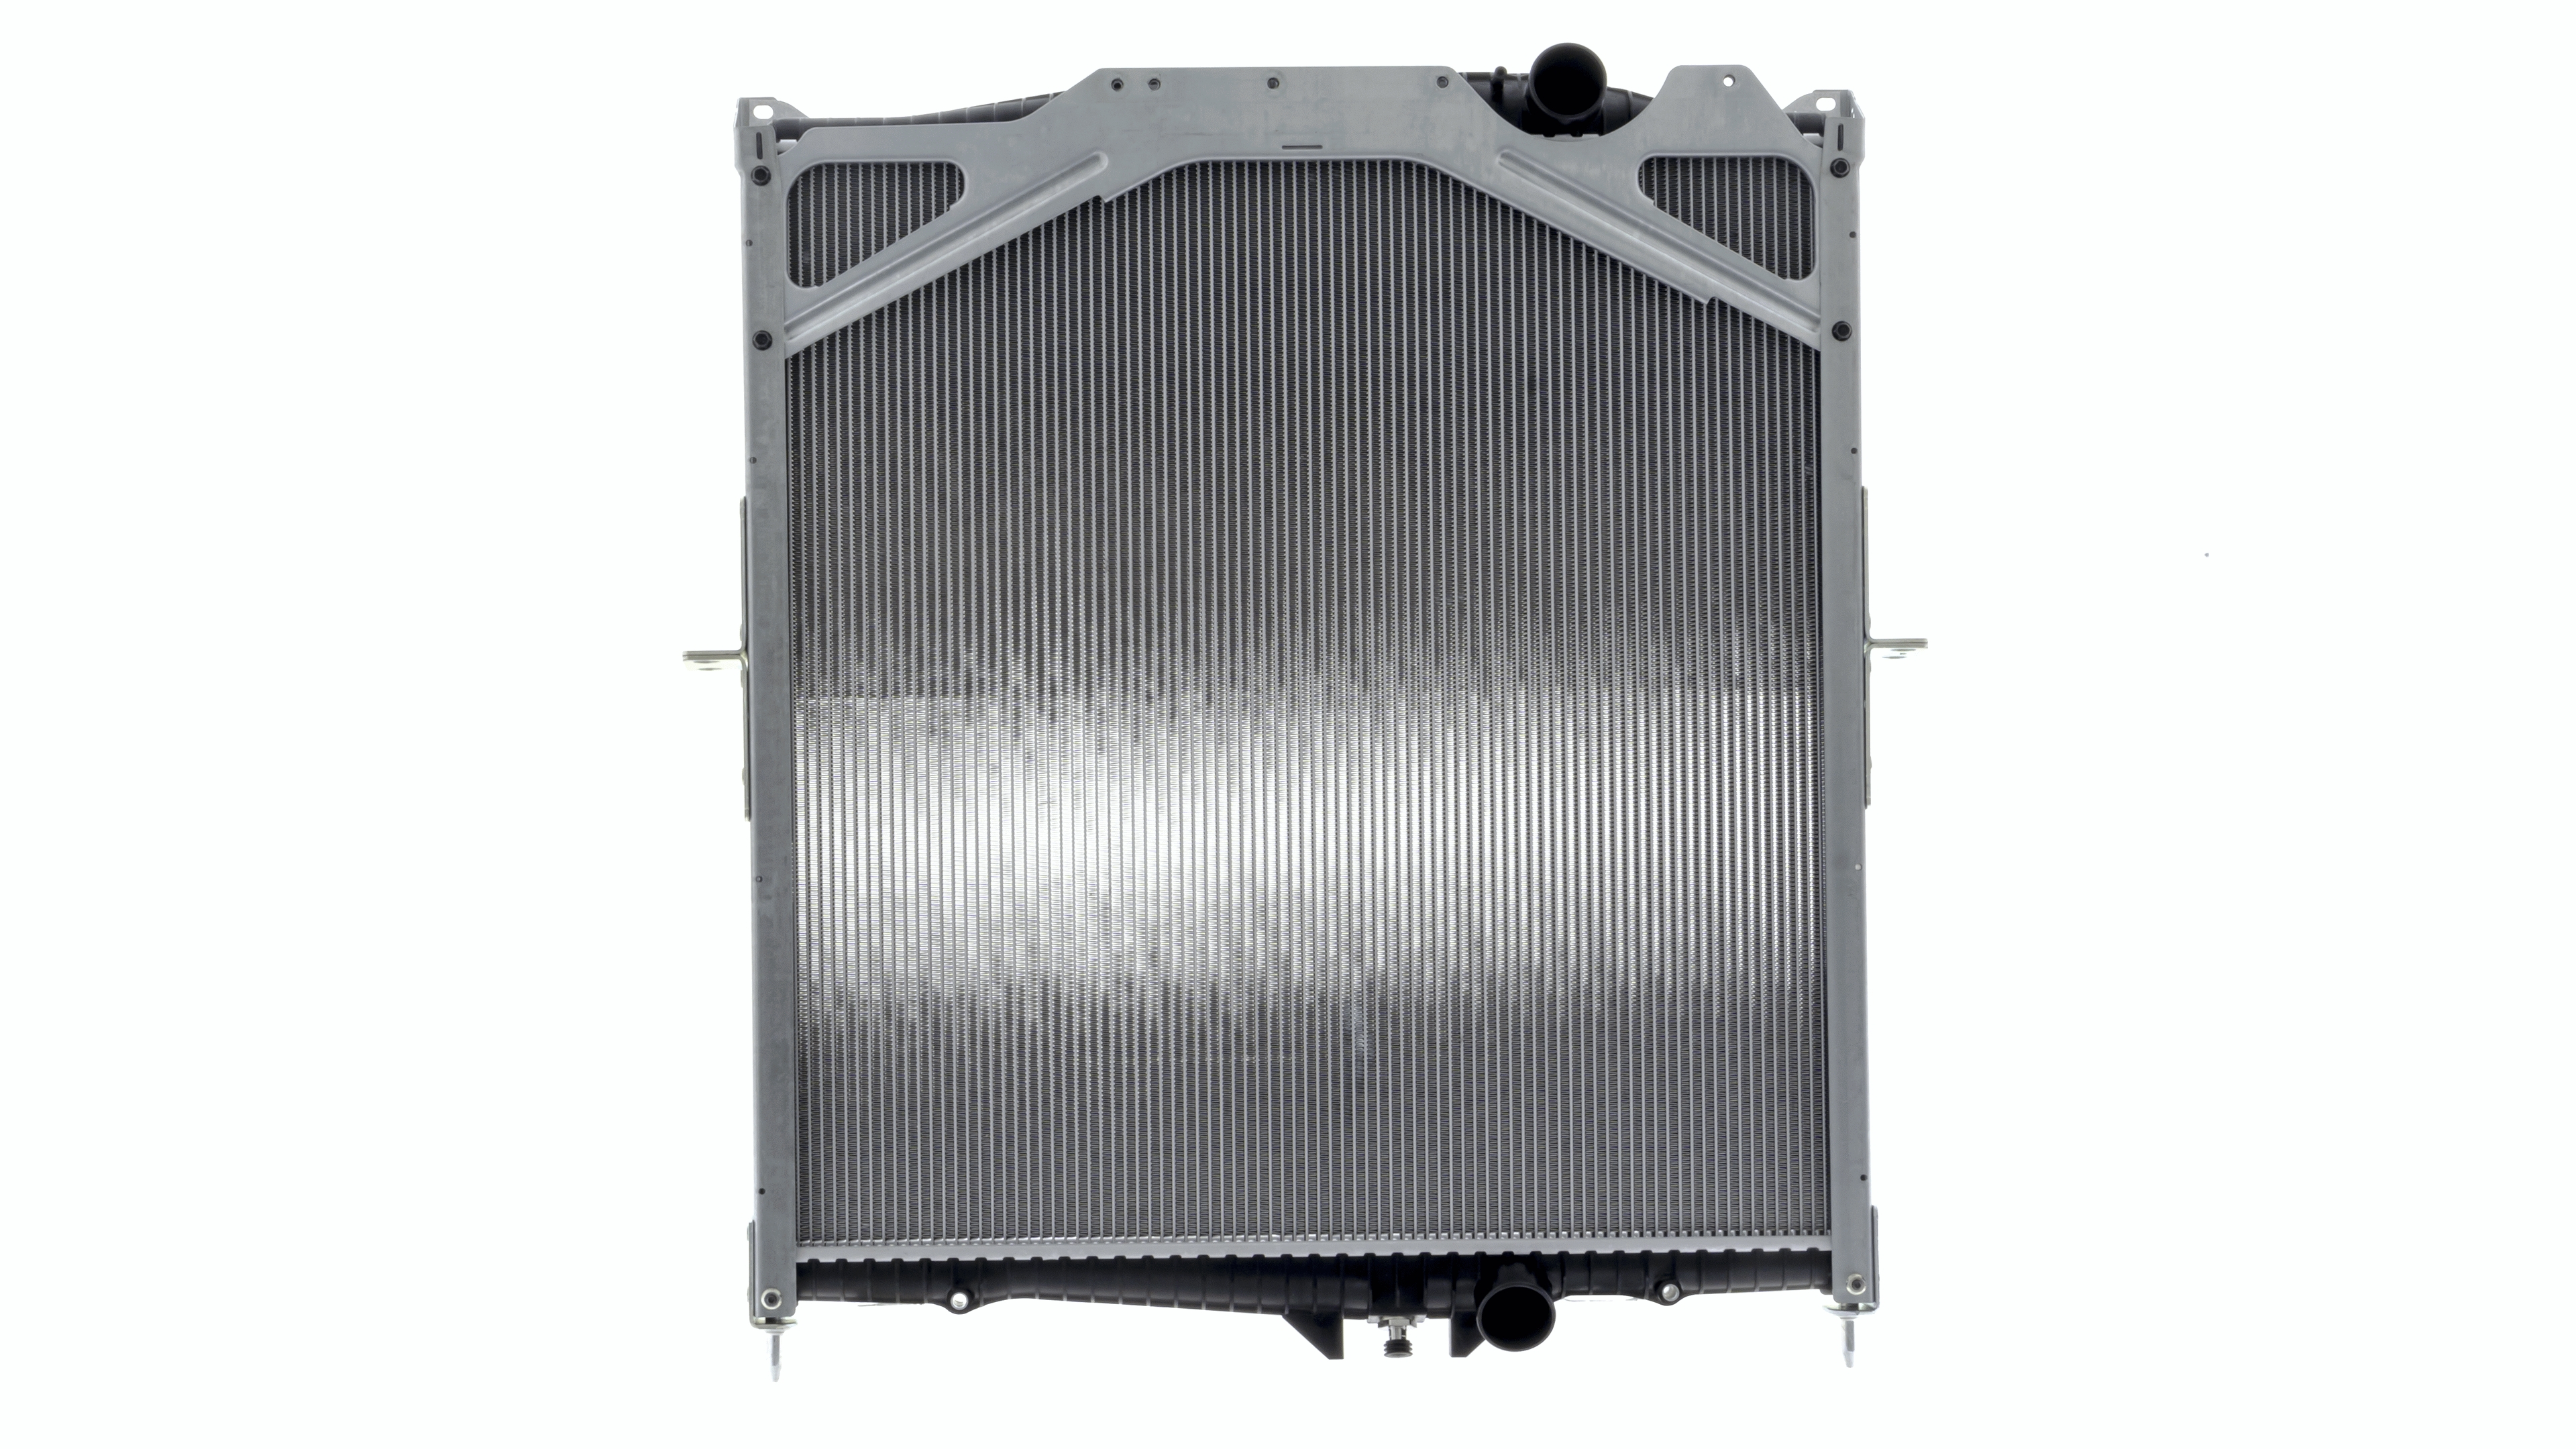 MAHLE ORIGINAL CR 1556 000P Engine radiator Aluminium, for vehicles with/without air conditioning, 900 x 870 x 48 mm, with frame, Brazed cooling fins